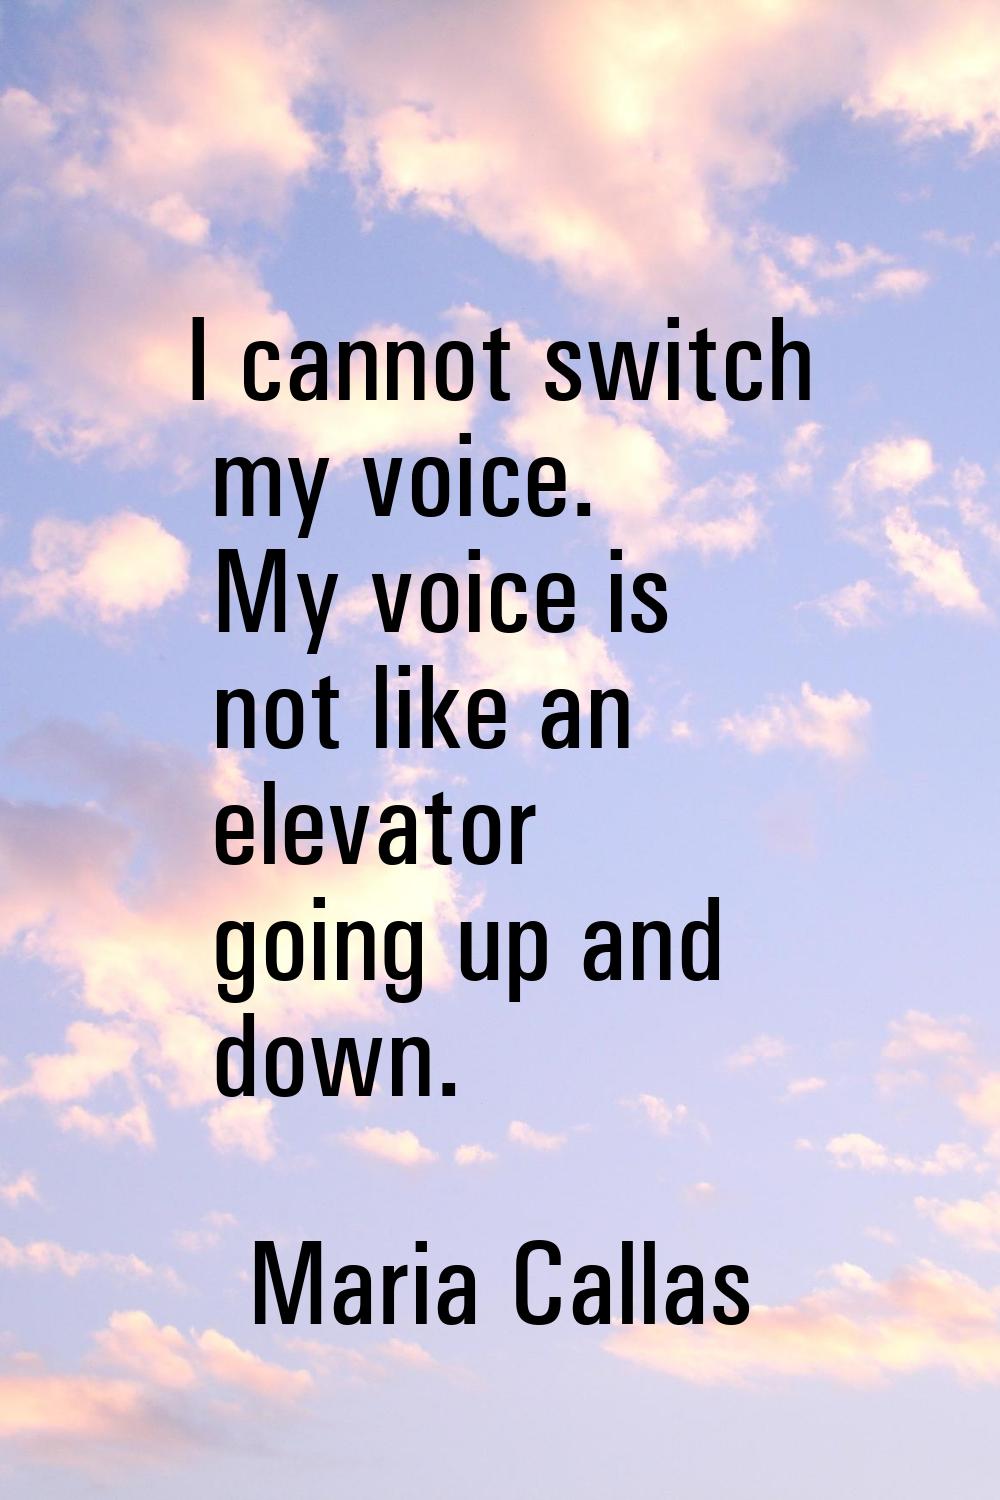 I cannot switch my voice. My voice is not like an elevator going up and down.